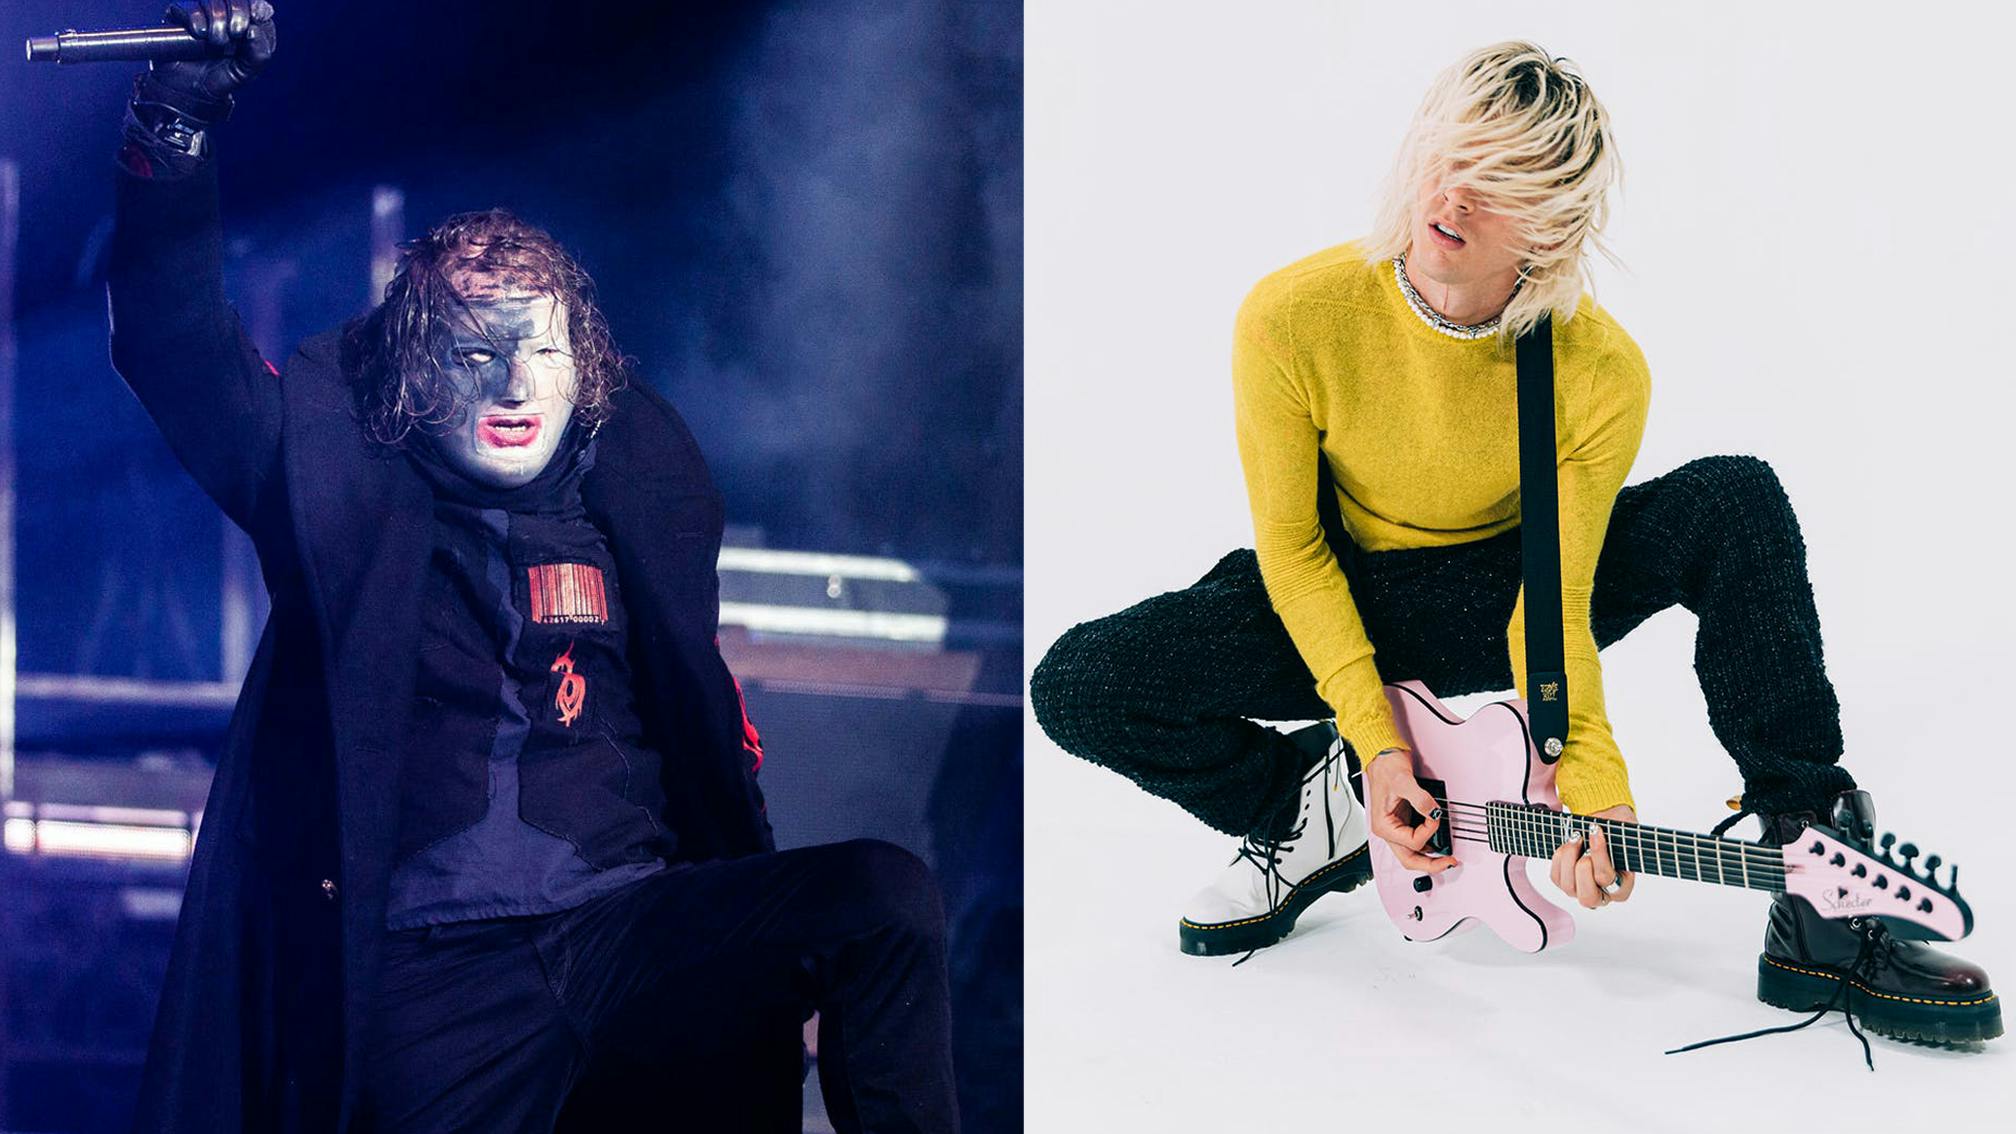 MGK disses Slipknot for "being 50 years old wearing a f*cking weird mask"